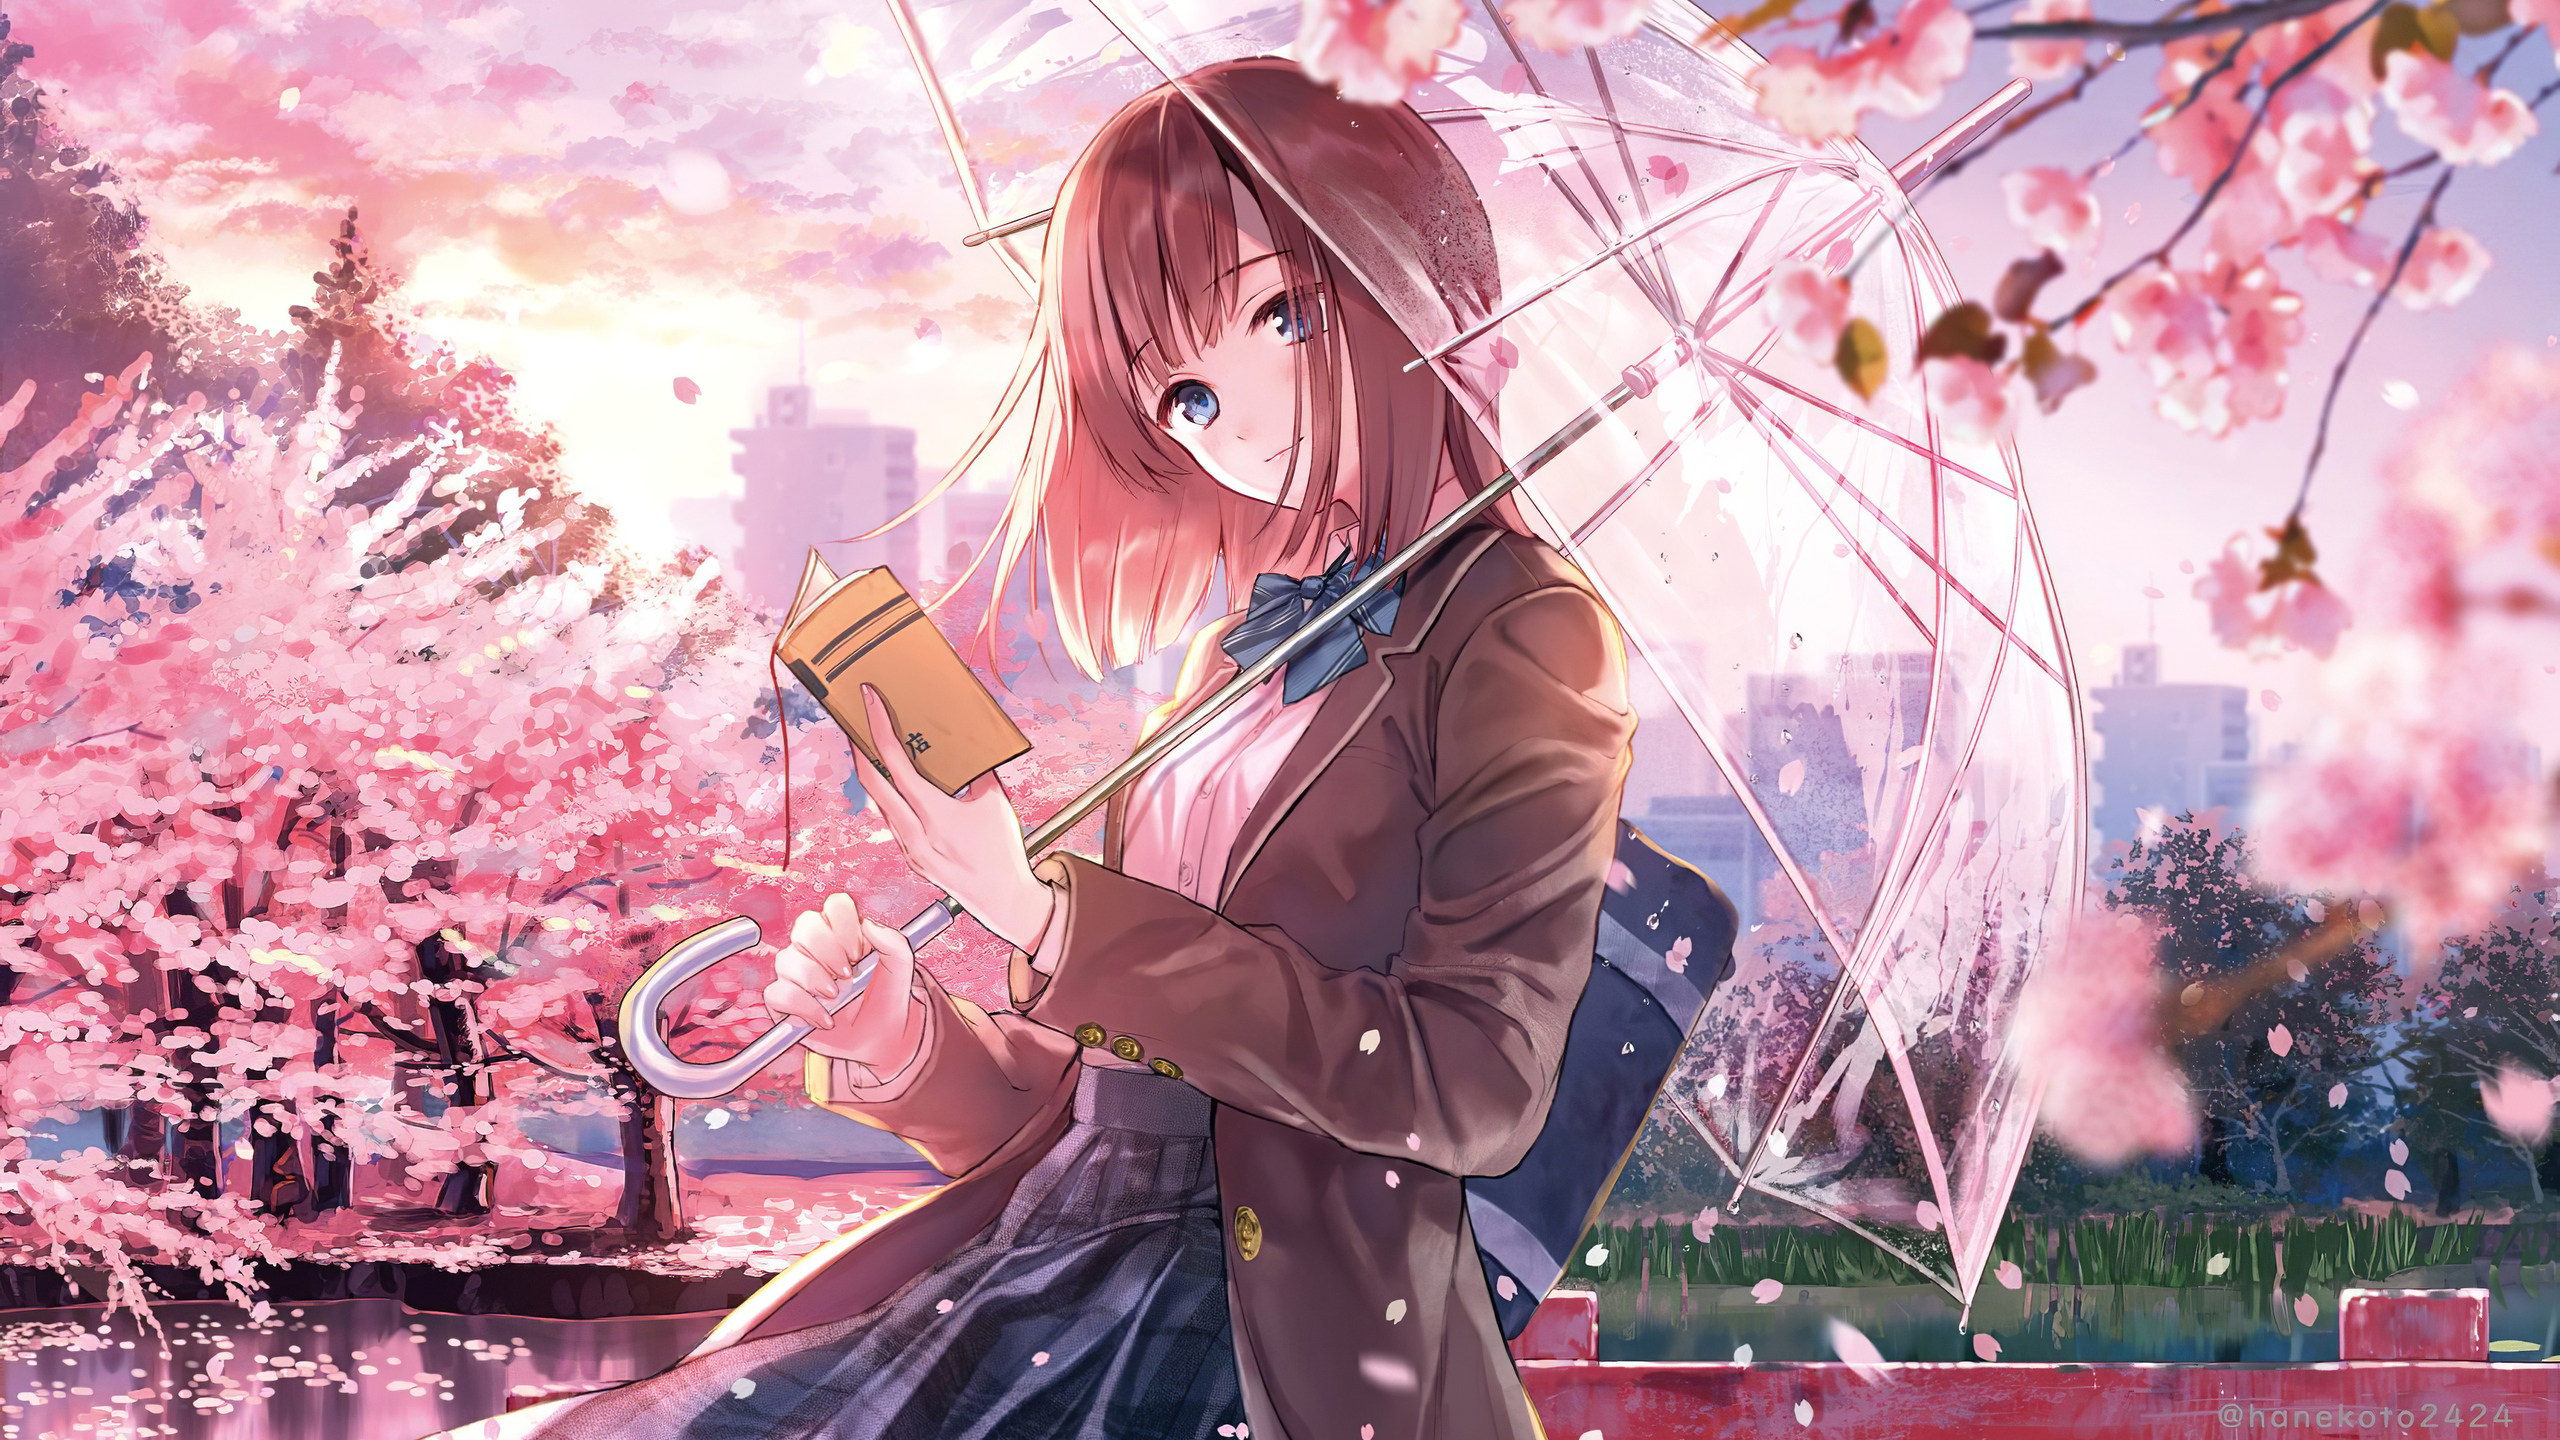 X anime girl cherry blossom season k p resolution hd k wallpapers images backgrounds photos and pictures